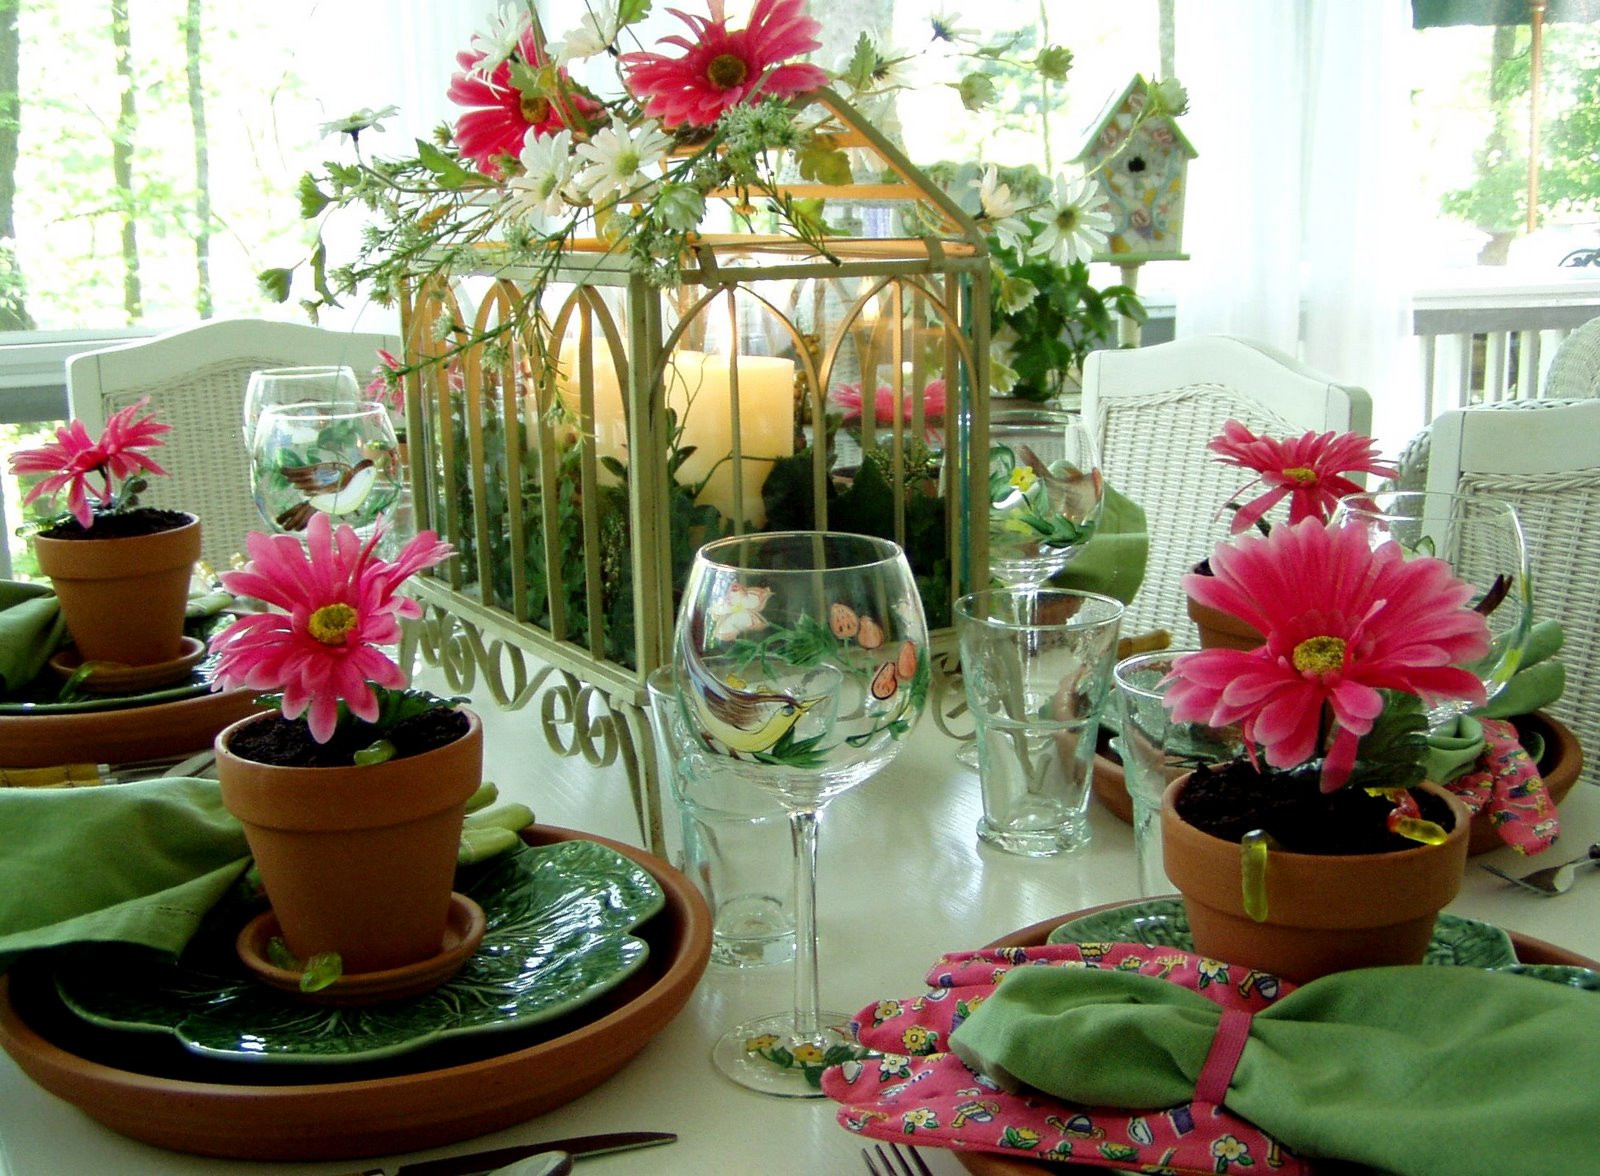 Tea Party Table Setting Ideas
 A Garden Party Table Setting TablesScape